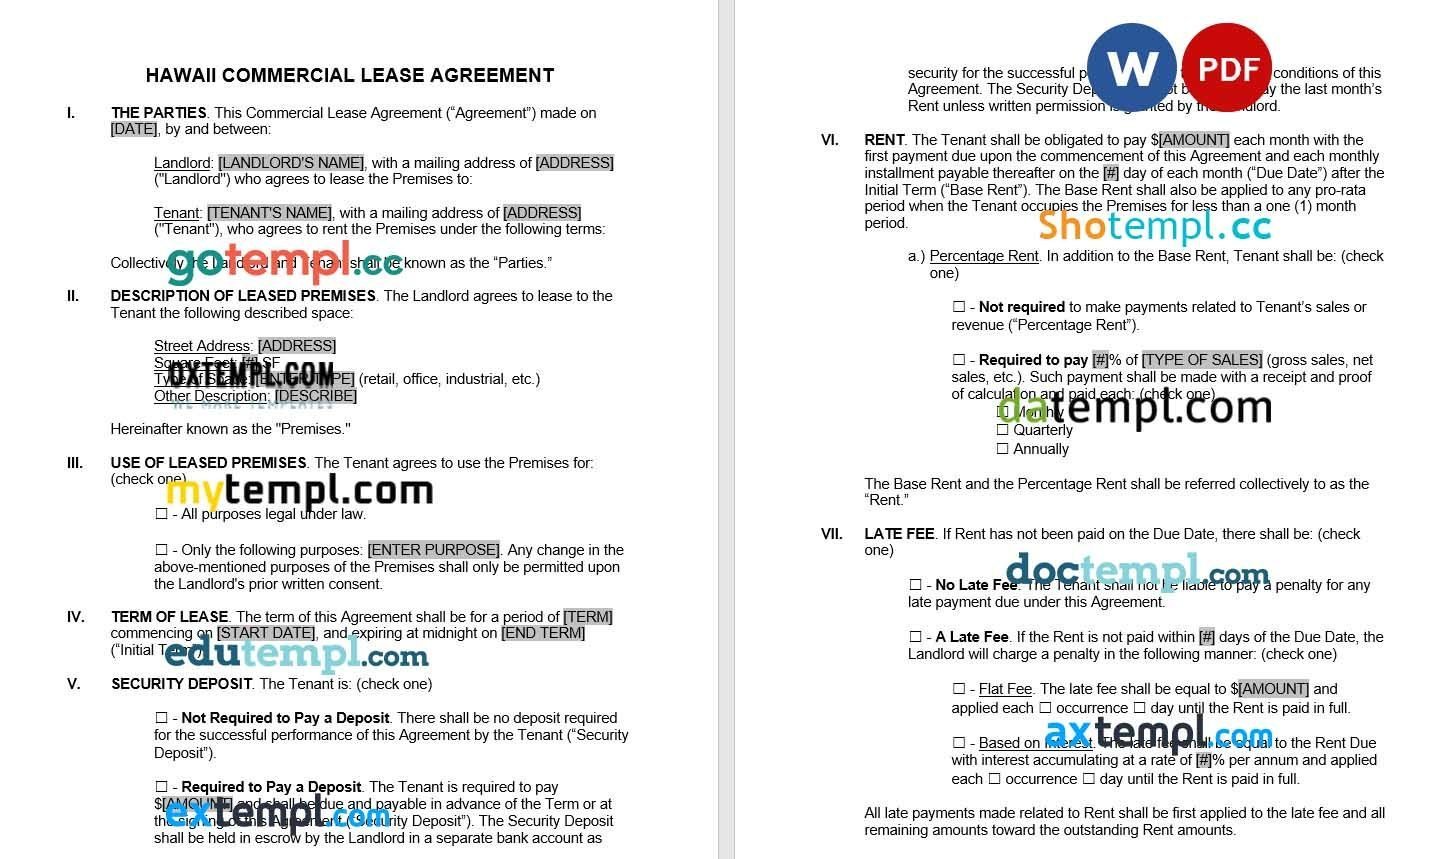 Hawaii Commercial Lease Agreement Word example, fully editable